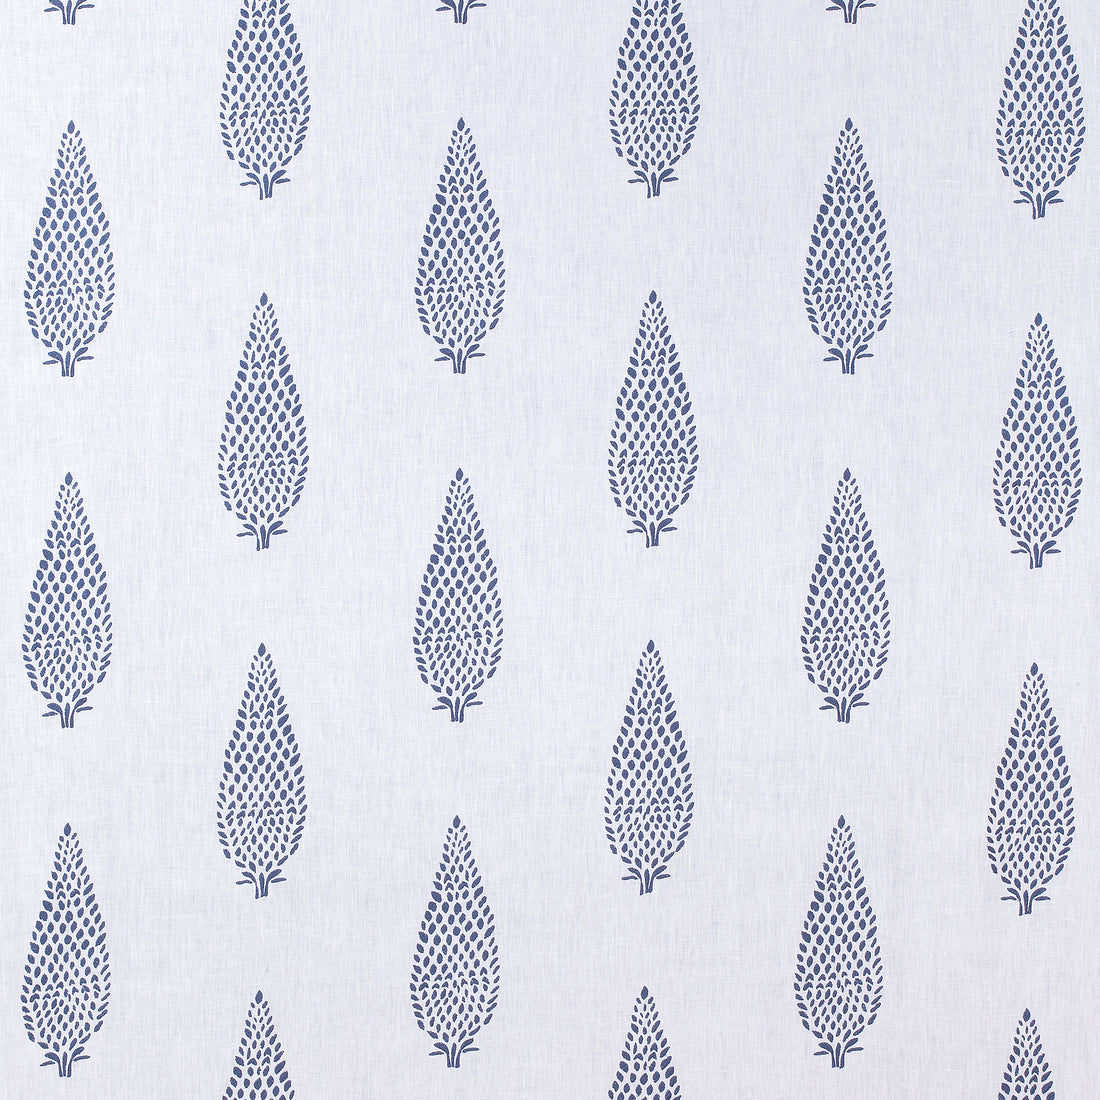 Manor Embroidery fabric in navy on white color - pattern number AW73005 - by Anna French in the Meridian collection